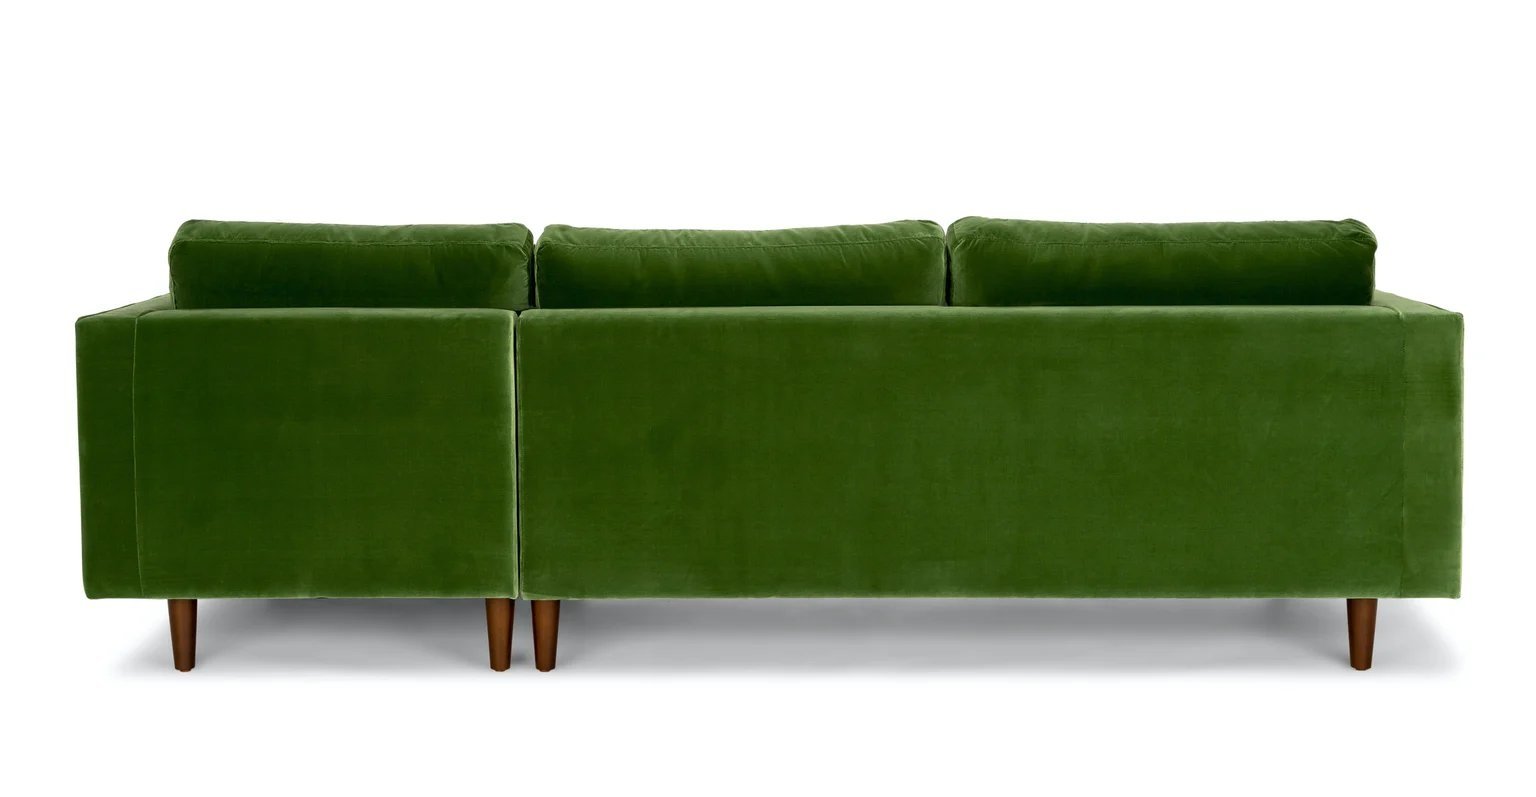 Sven Right Sectional Sofa, Grass Green - Image 6